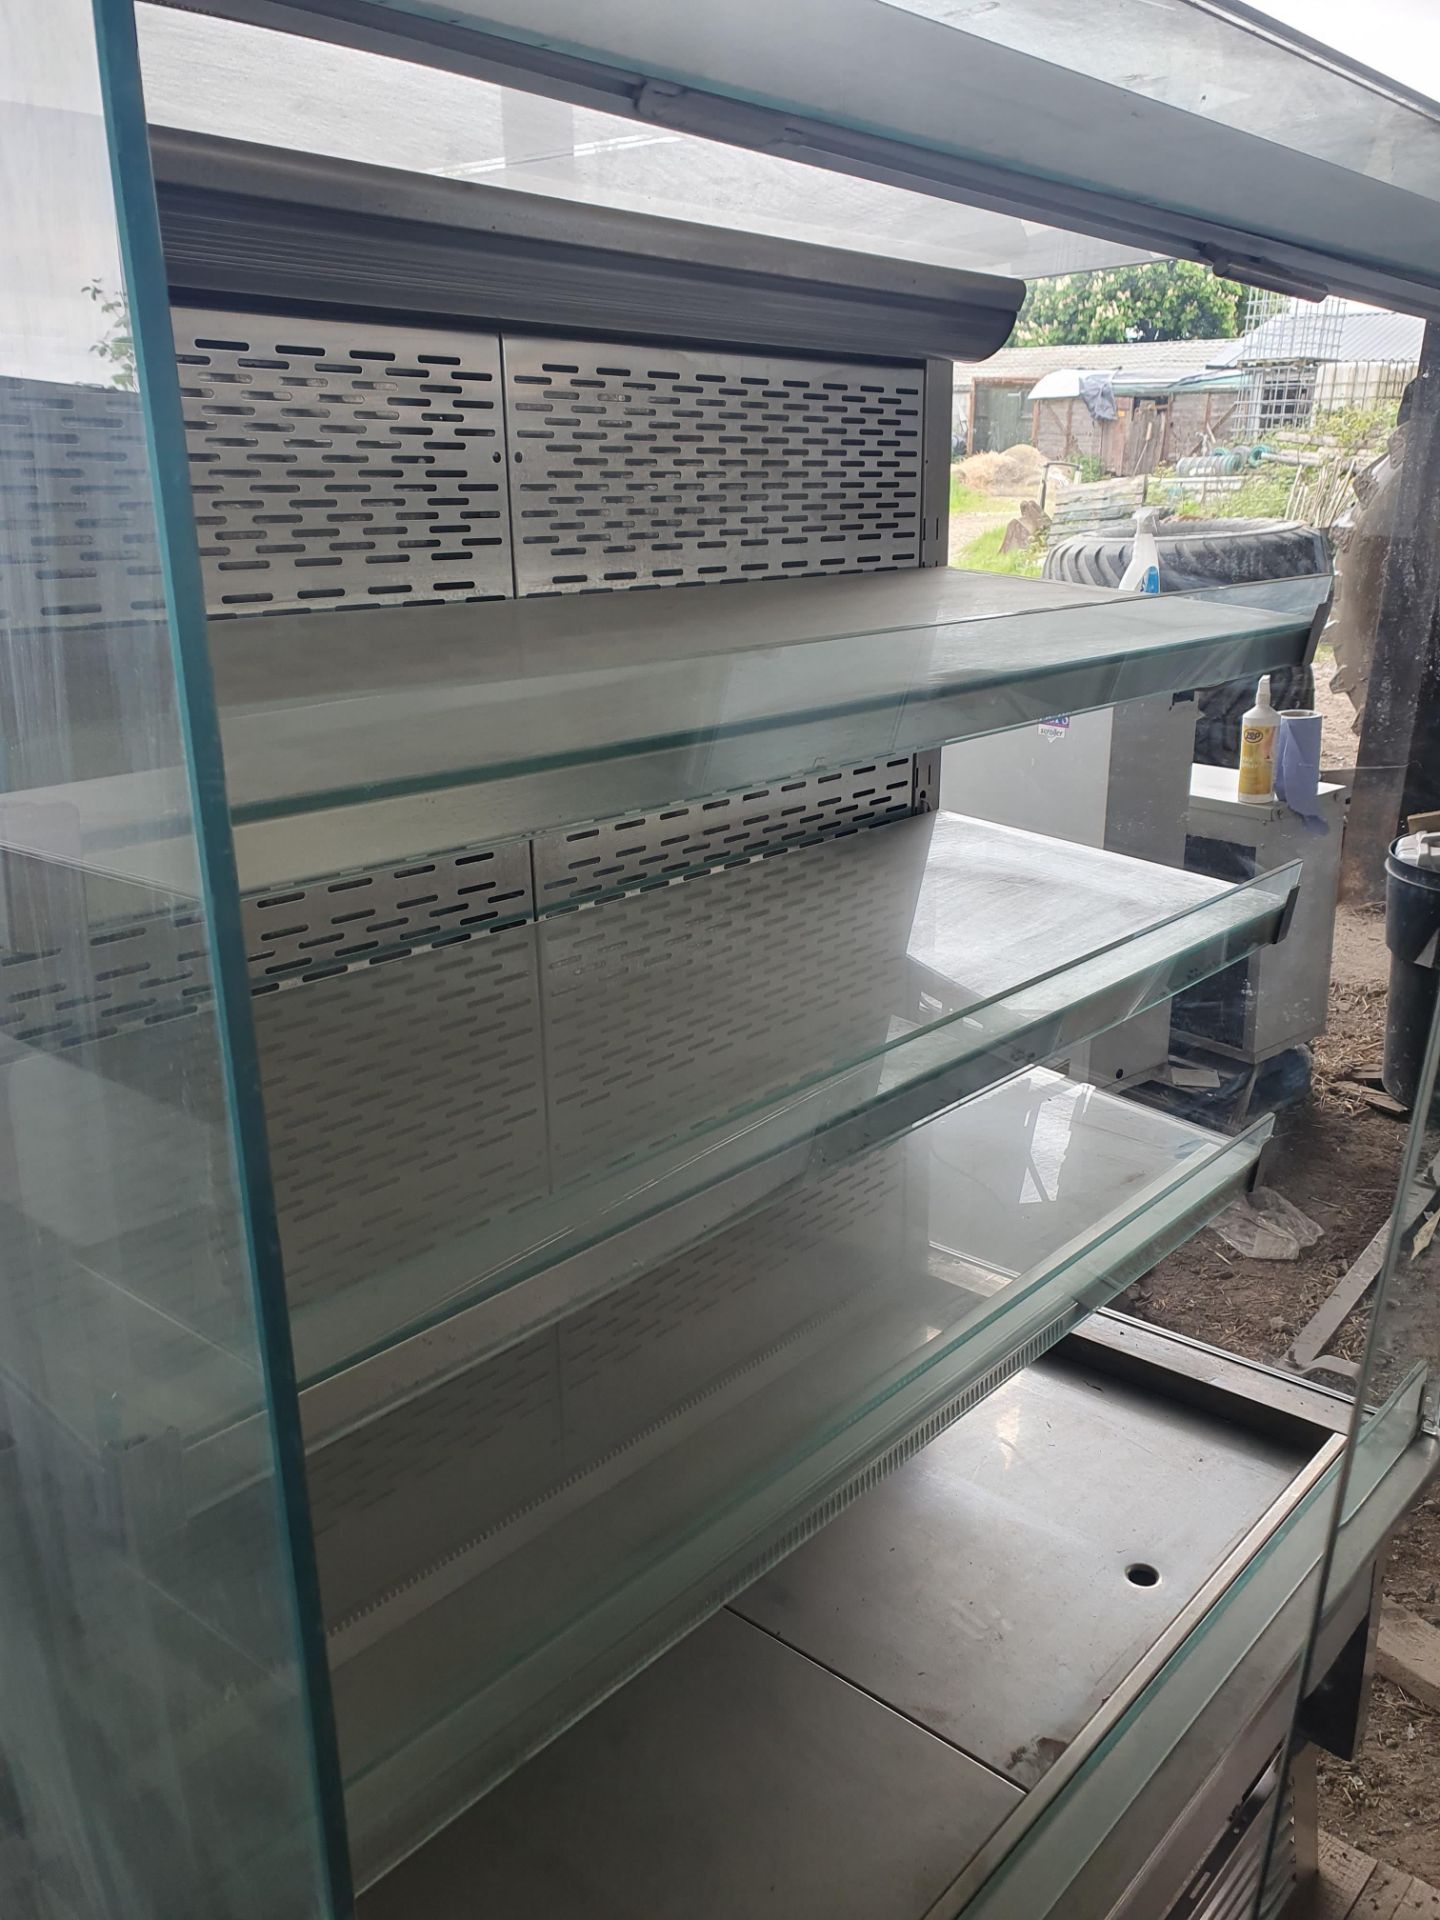 *Refridgerated glass dispay chiller unit designed to be built into counter with lights and night